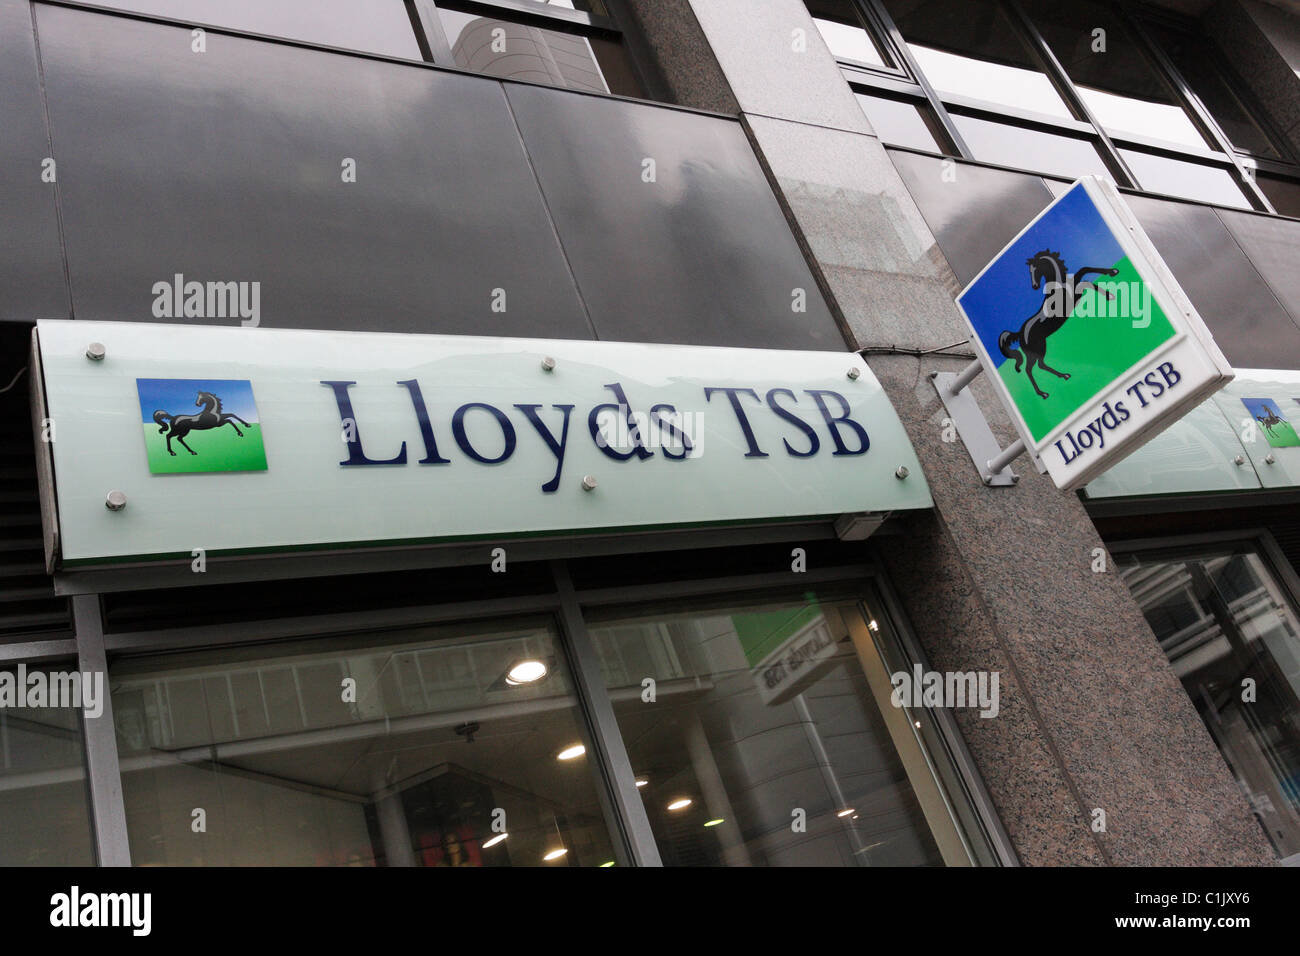 The sign of the Black Horse of Lloyds TSB Bank in Finsbury Pavement,viewed here from a low level in the City of London. Stock Photo